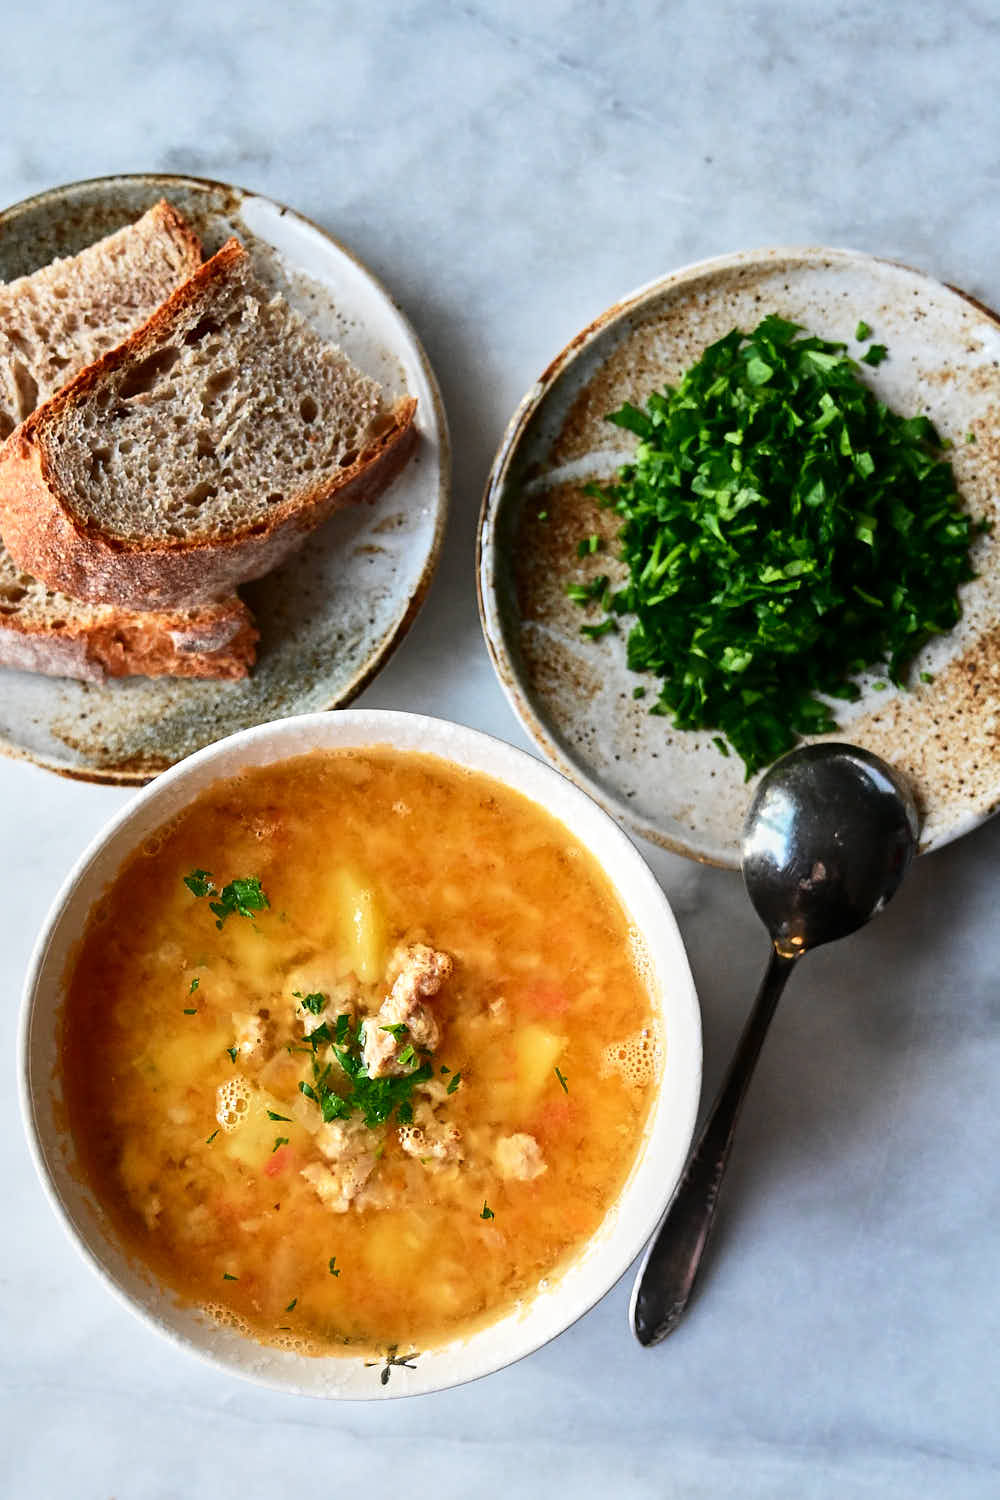 Chicken lentil soup with bread and chopped greens